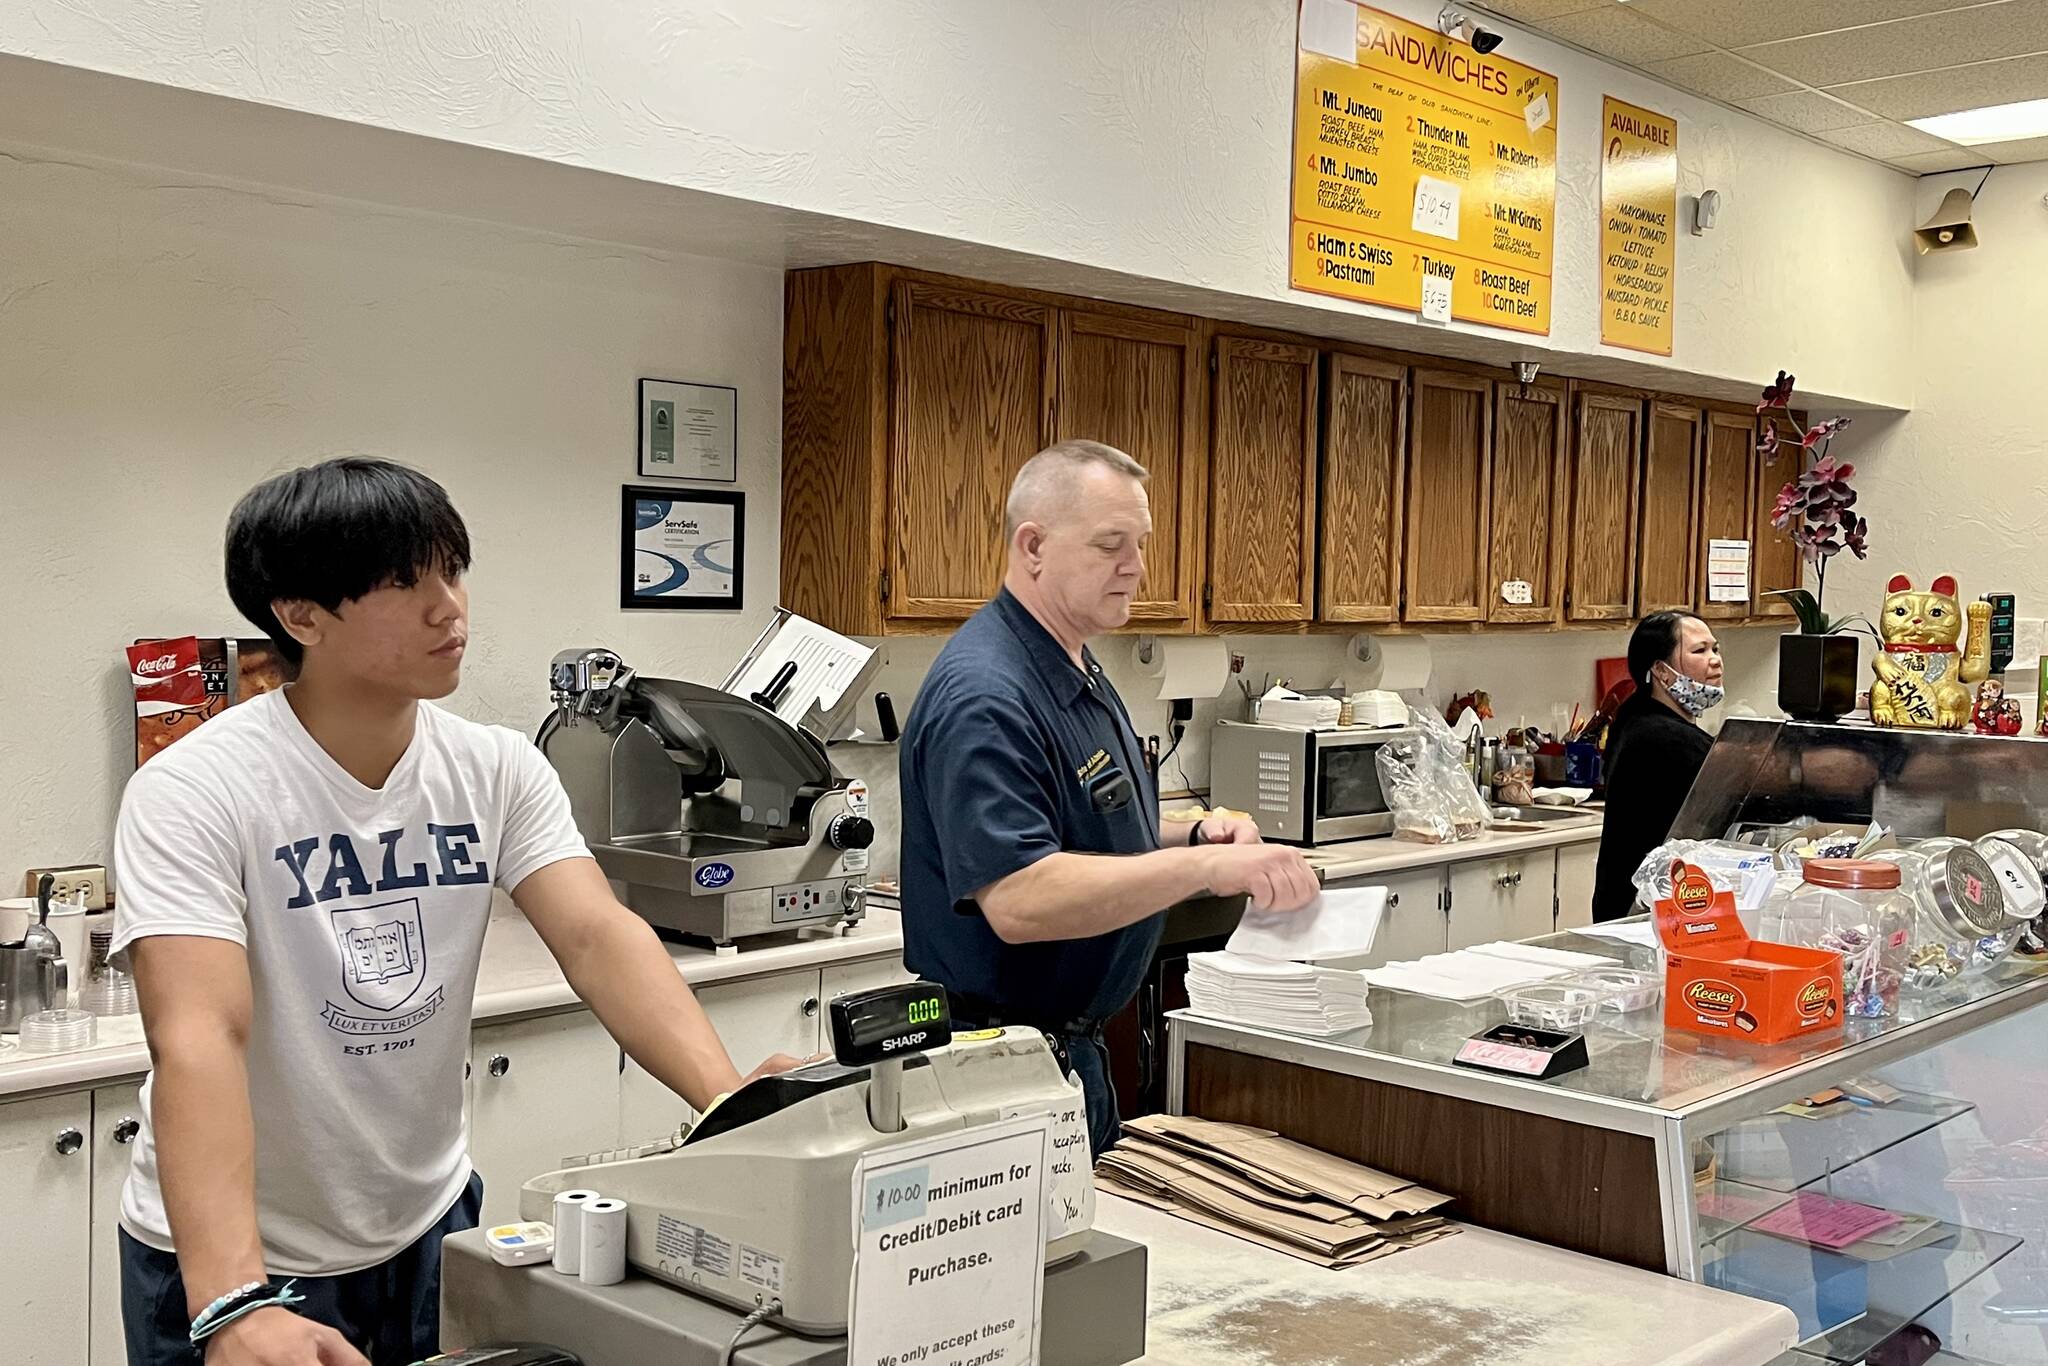 It was business as usual for the Doogan family, Isaac, Neil and Alma, as they steadily work through a busy lunch rush Tuesday at J&J Deli and Asian Market. (Jonson Kuhn / Juneau Empire)